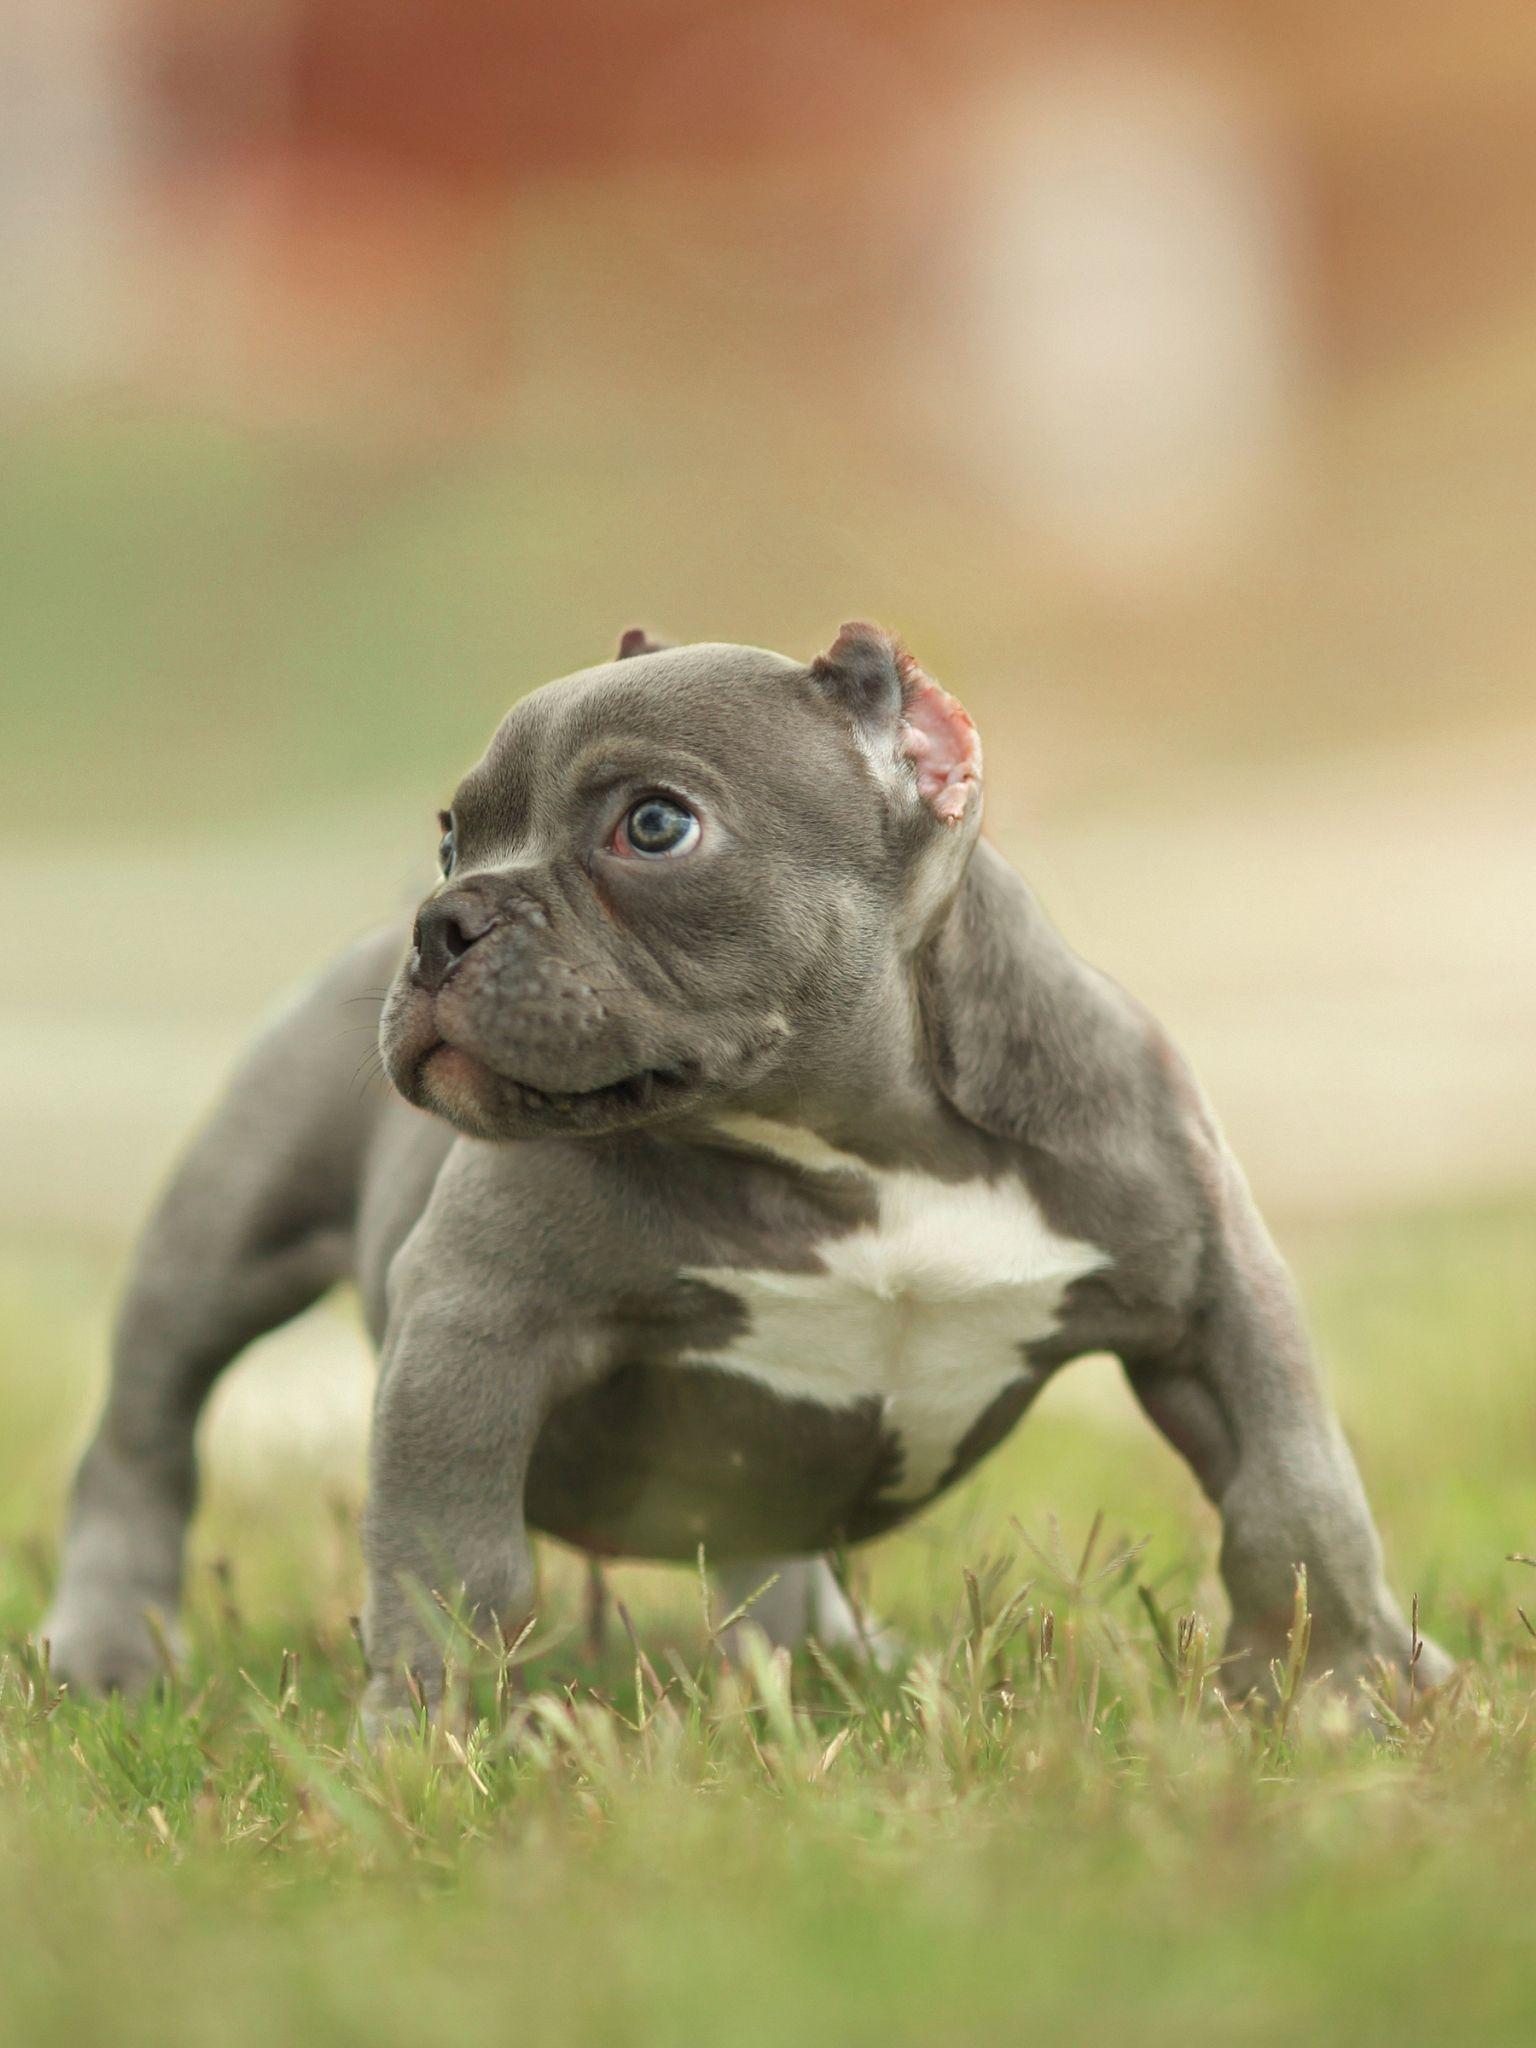 American Bully Wallpapers - Top Free American Bully Backgrounds ...